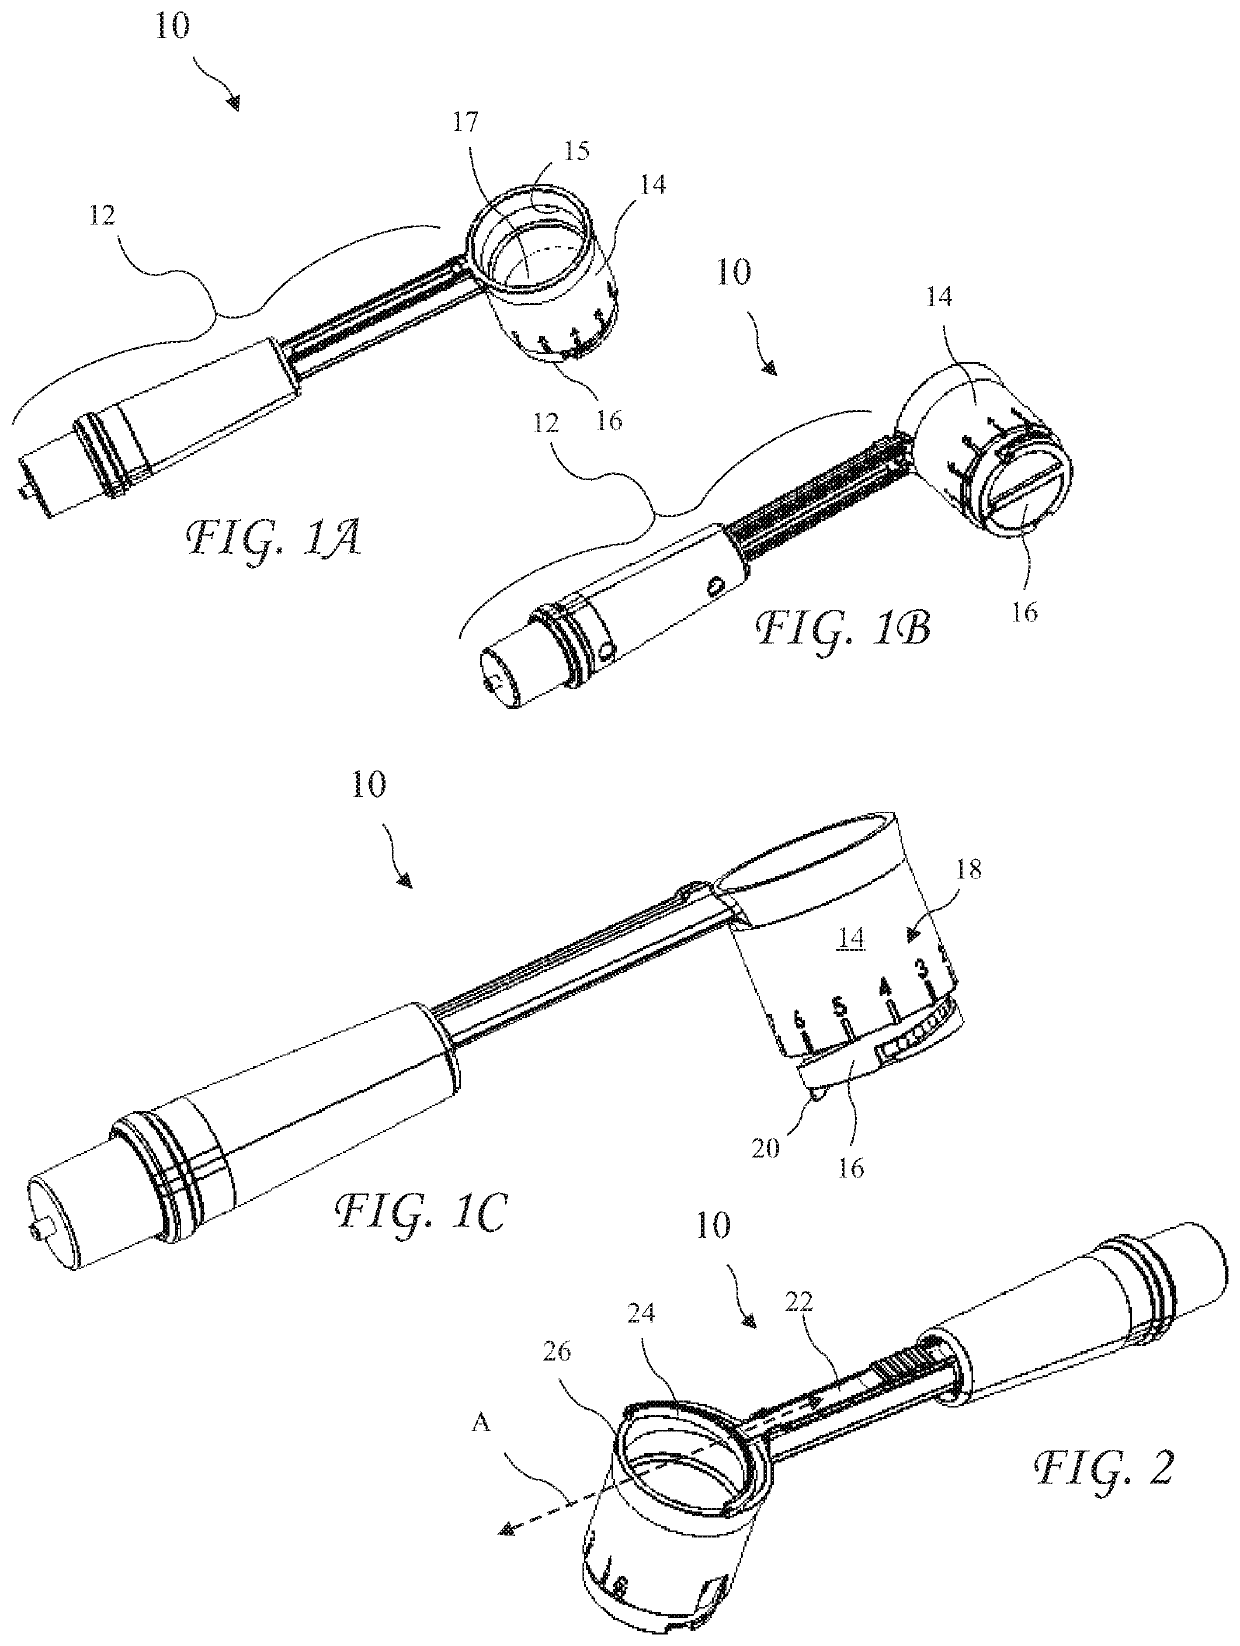 Adjustable Scooping Device